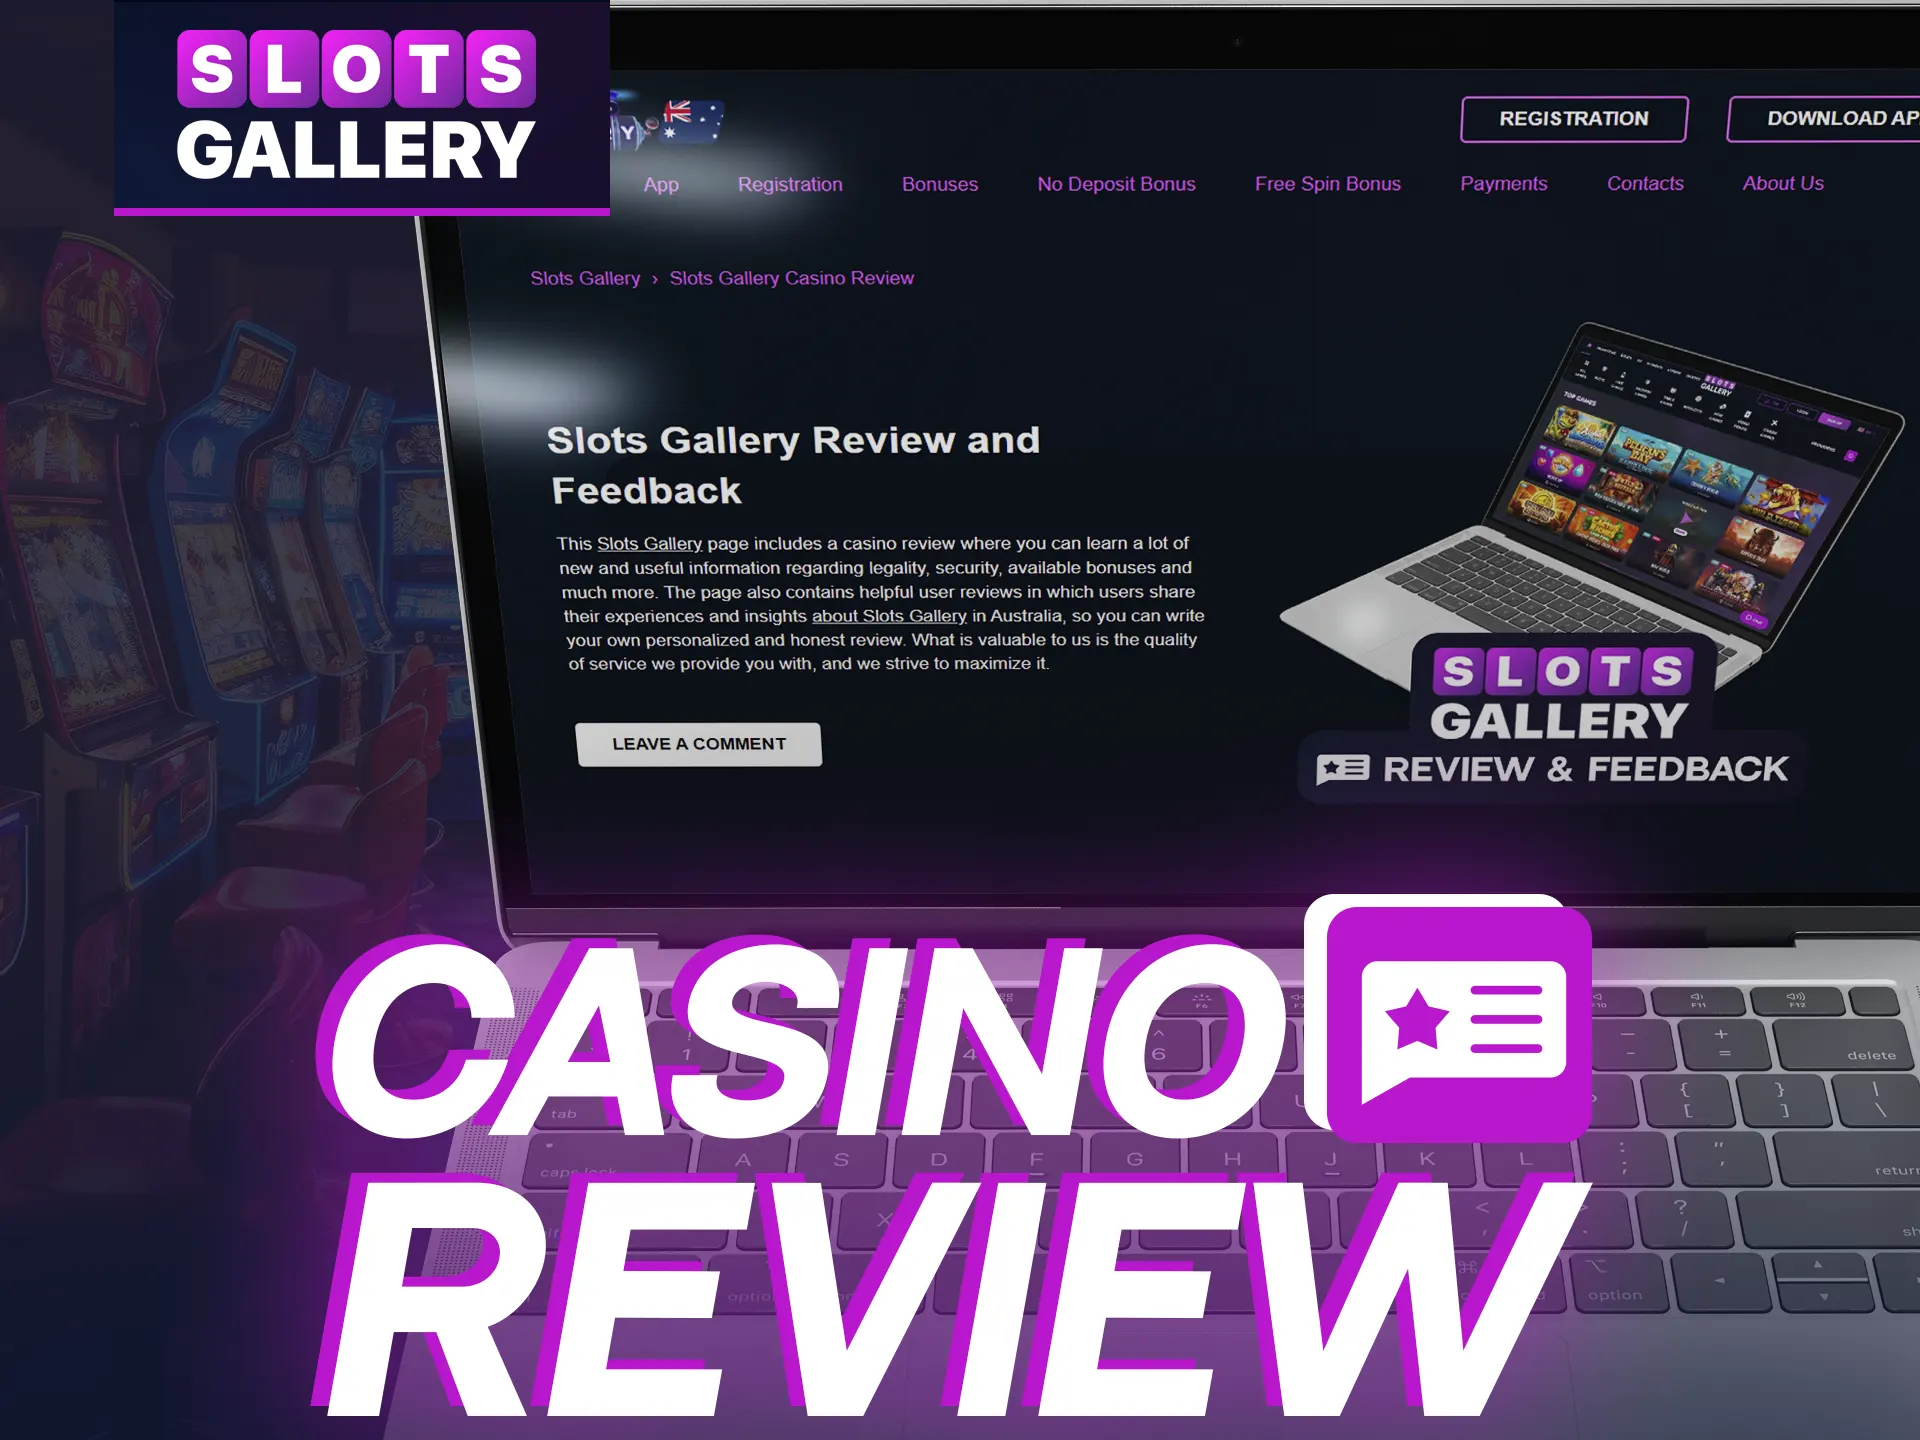 Share your experience at Slots Gallery Casino.